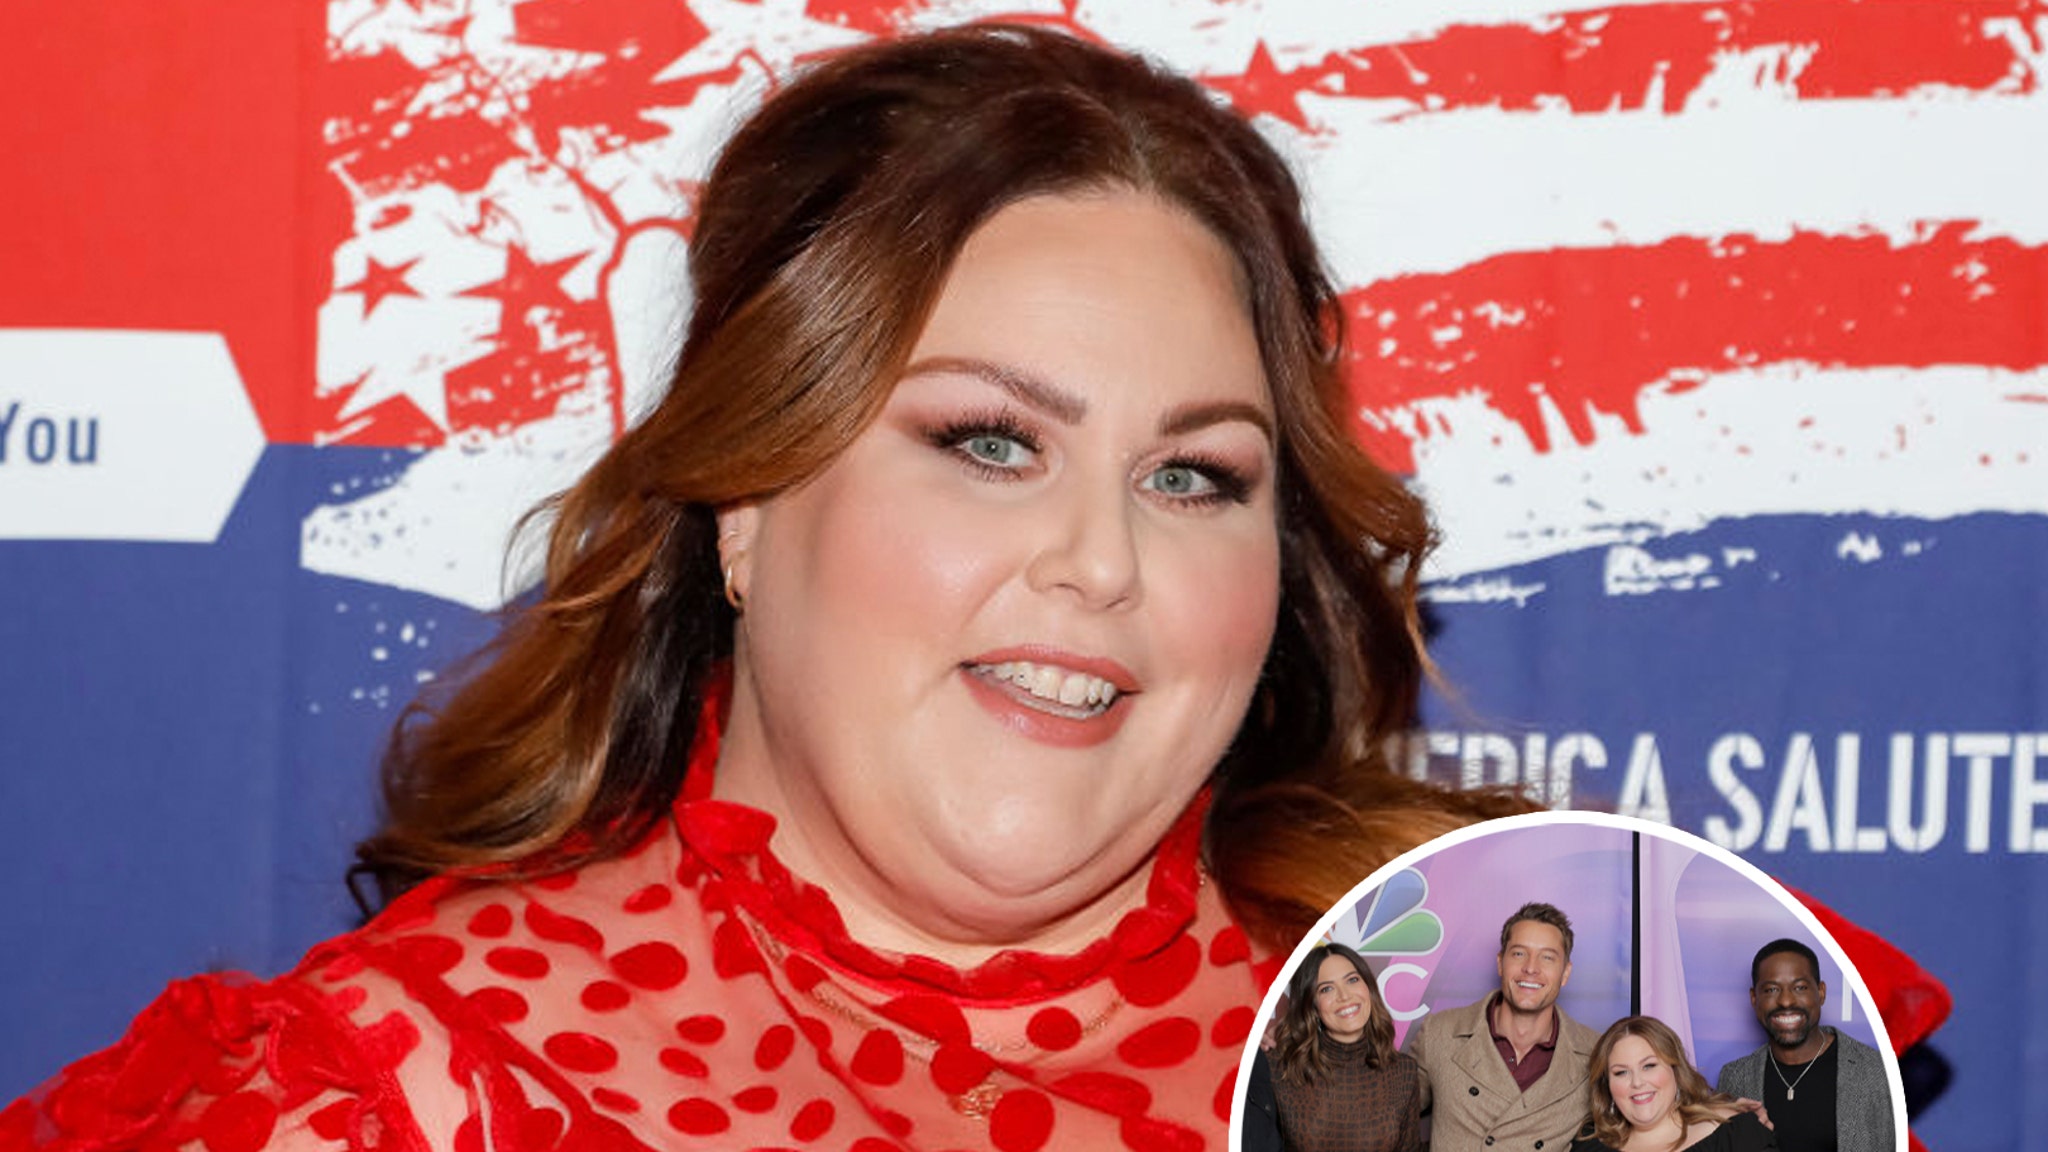 Chrissy Metz Wants a This Is Us Movie, Reveals Non-Negotiable for Returning (Exclusive)